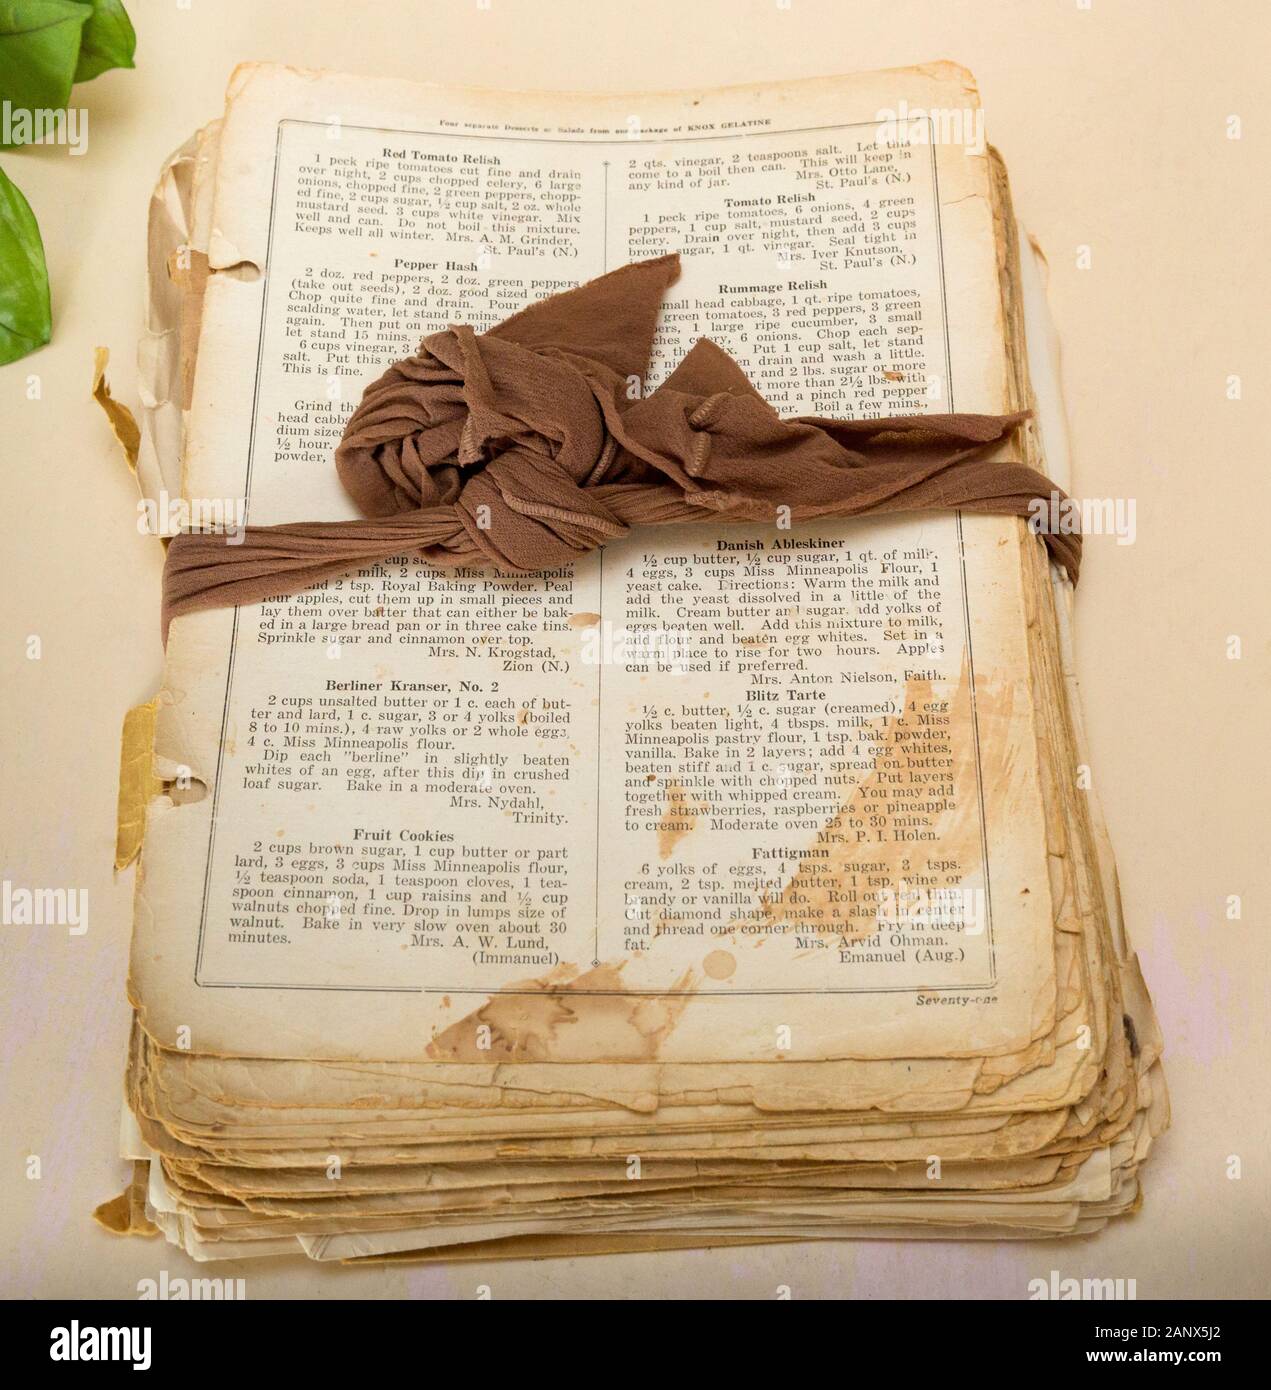 A grandmother's recipe cookbook with the pages bound together by a nylon stocking. On the lower right there is a recipe for Danish Aebleskiver or Dani Stock Photo